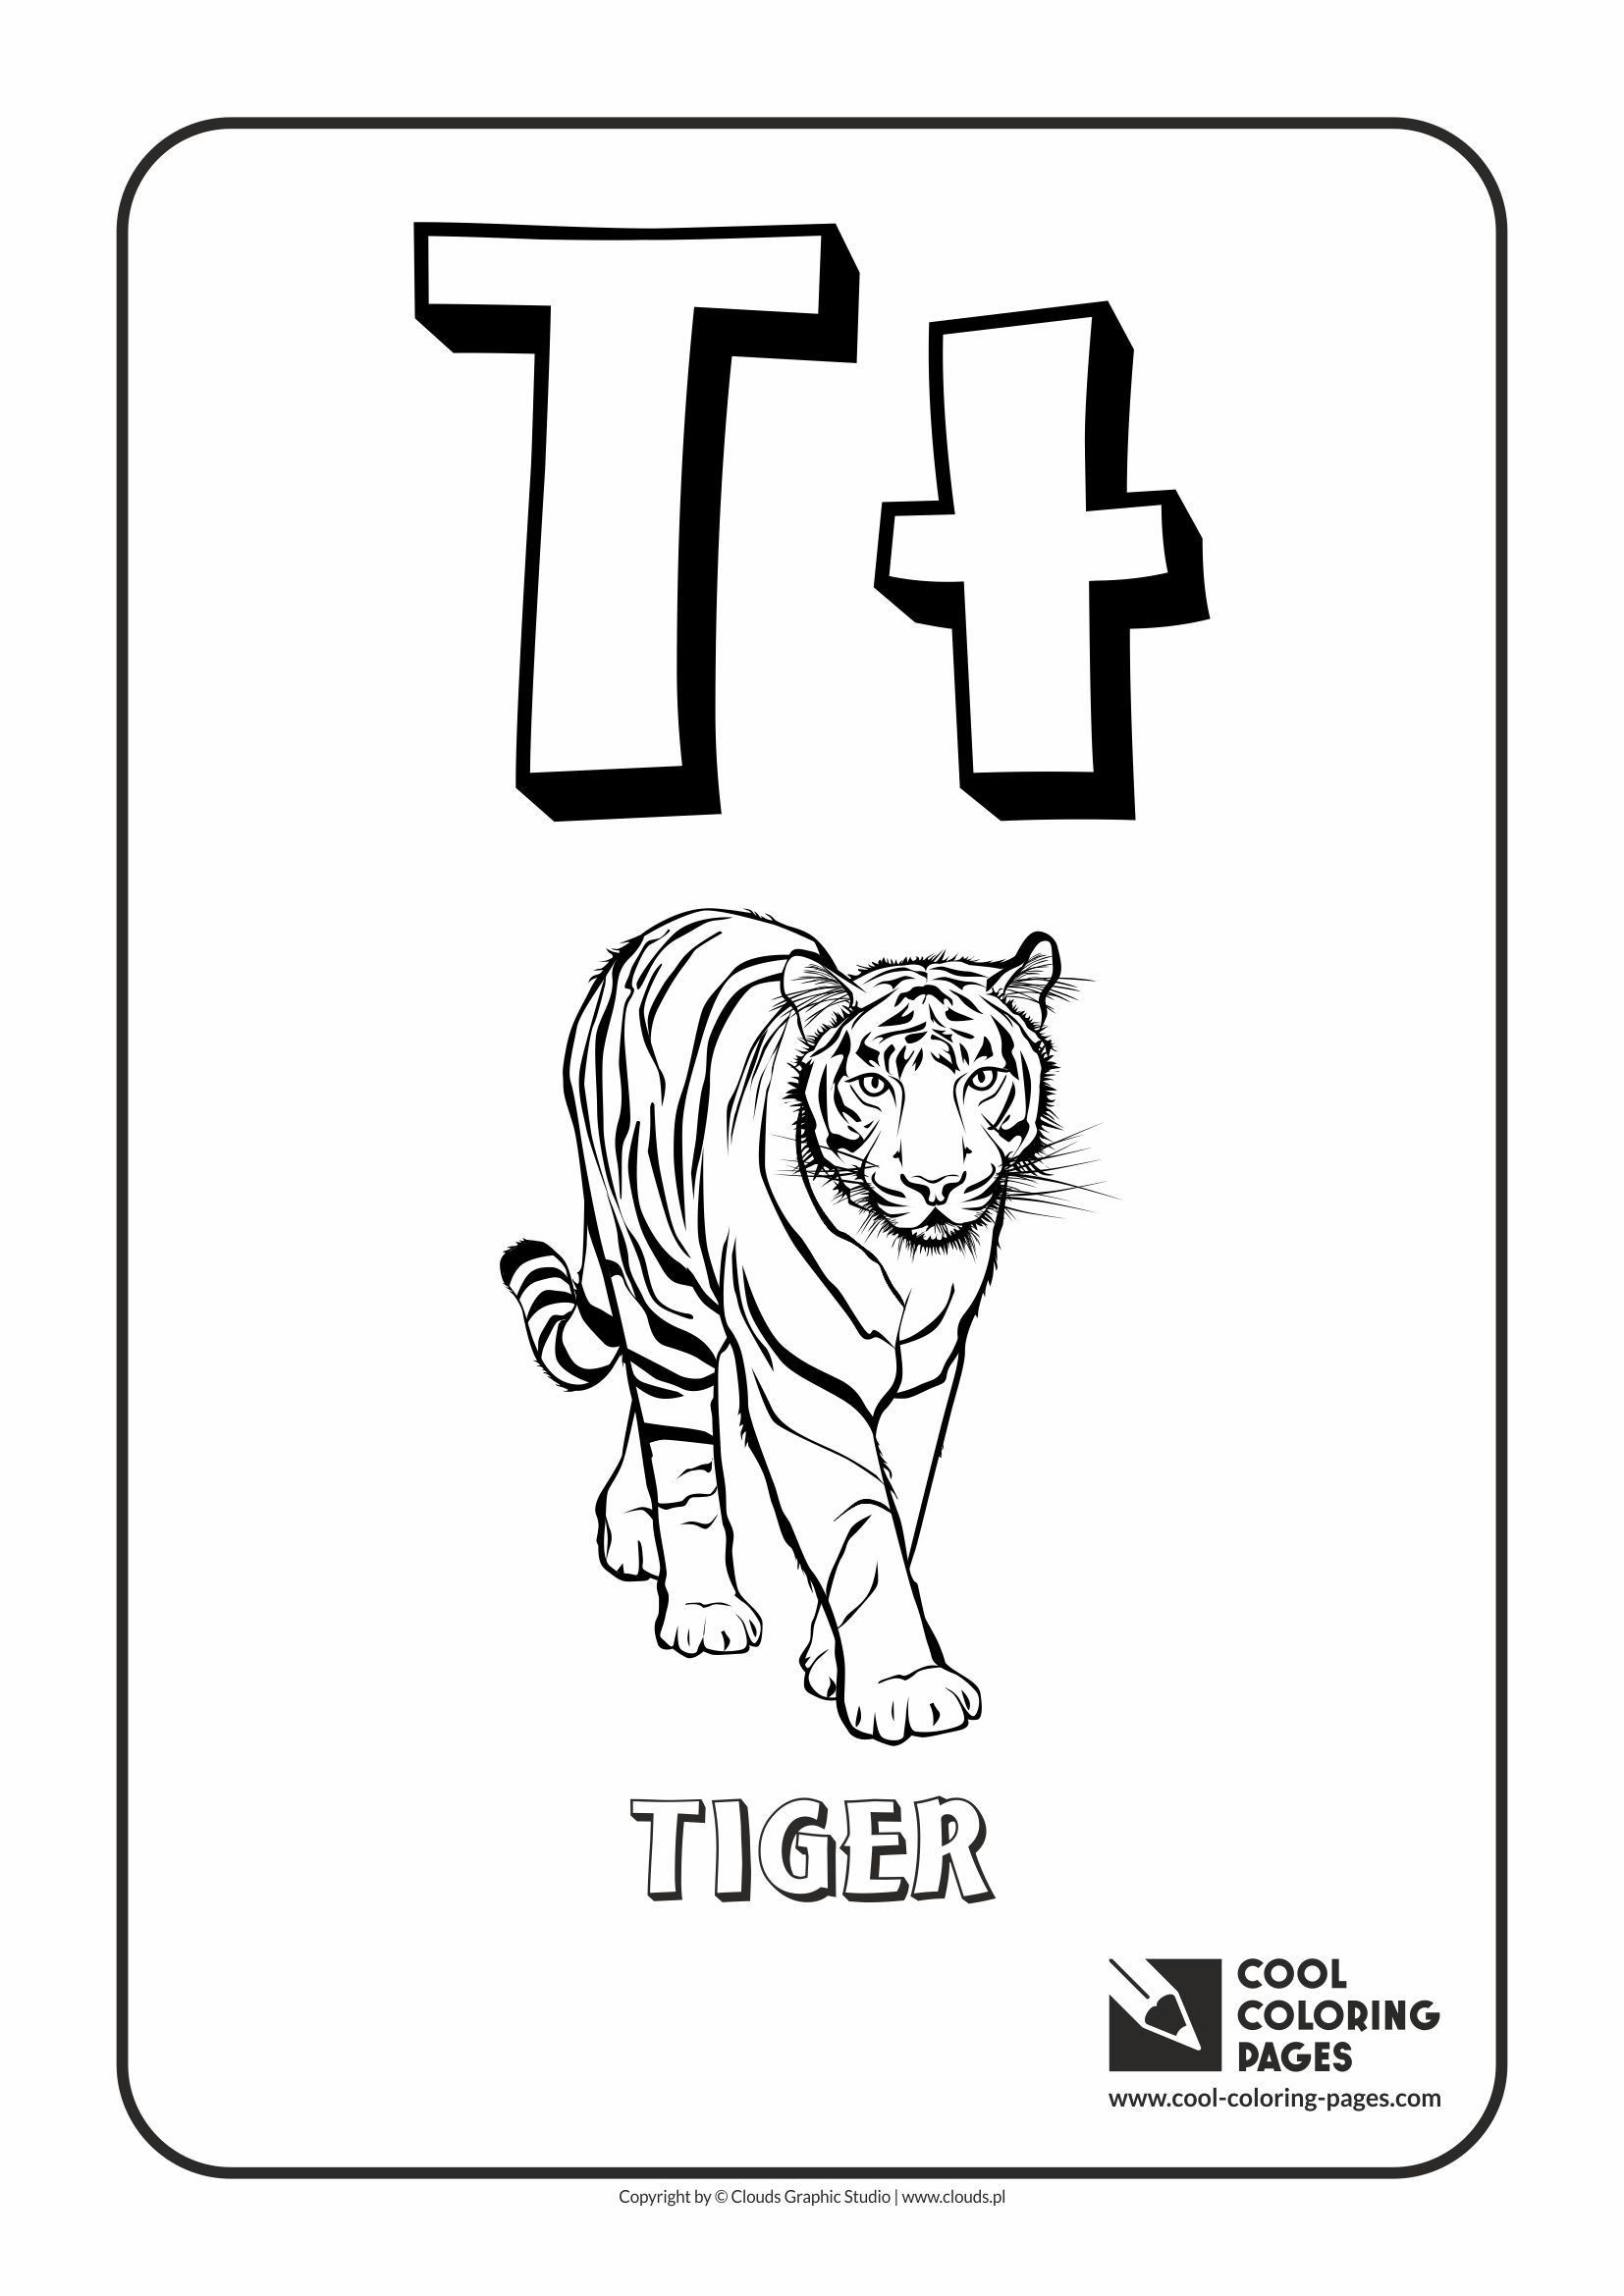 Cool Coloring Pages Alphabet coloring pages - Cool ...